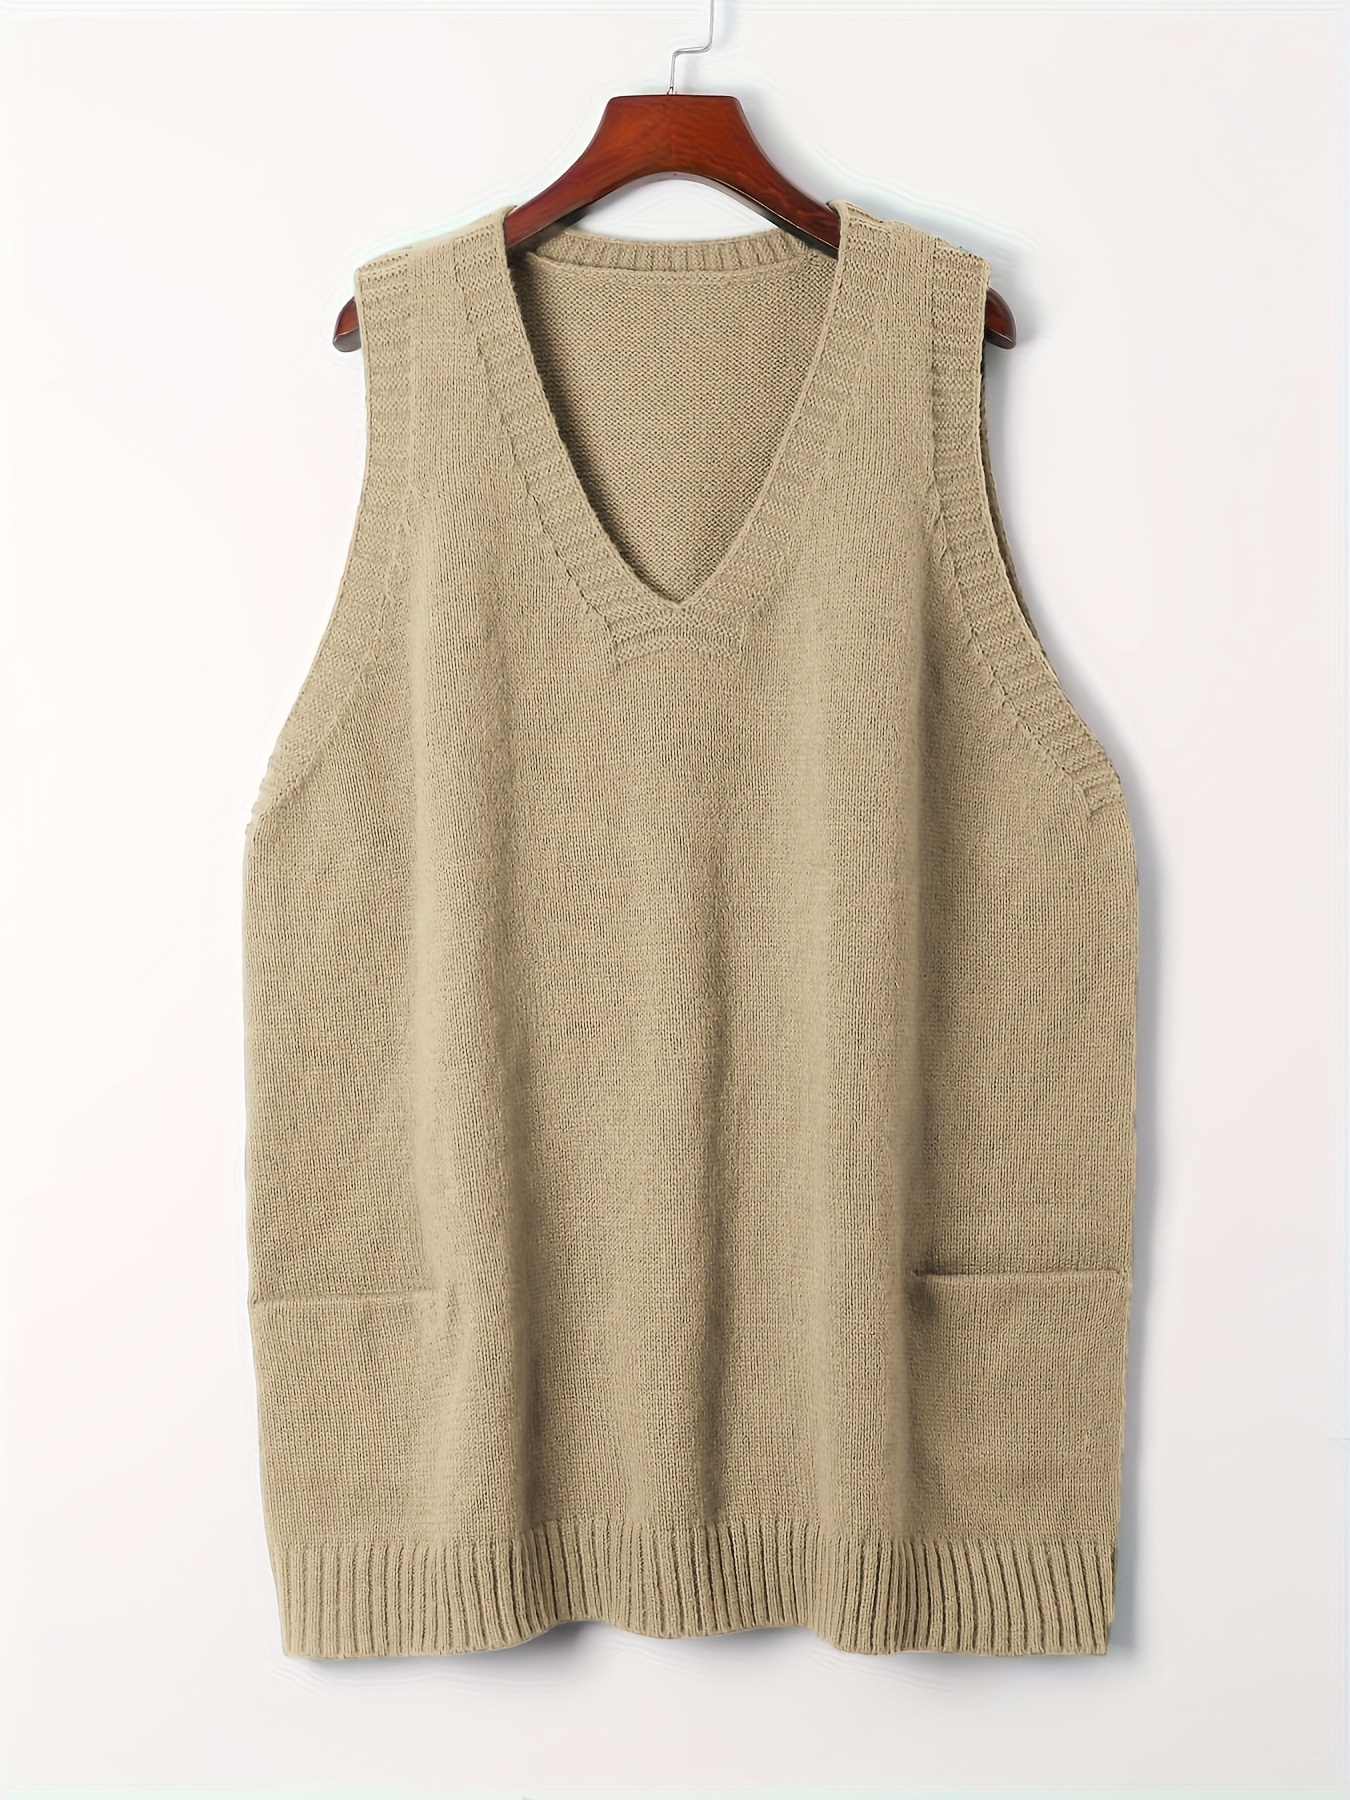 Fashion Casual Solid Knit Vest Sleeveless Sweater @ Best Price Online